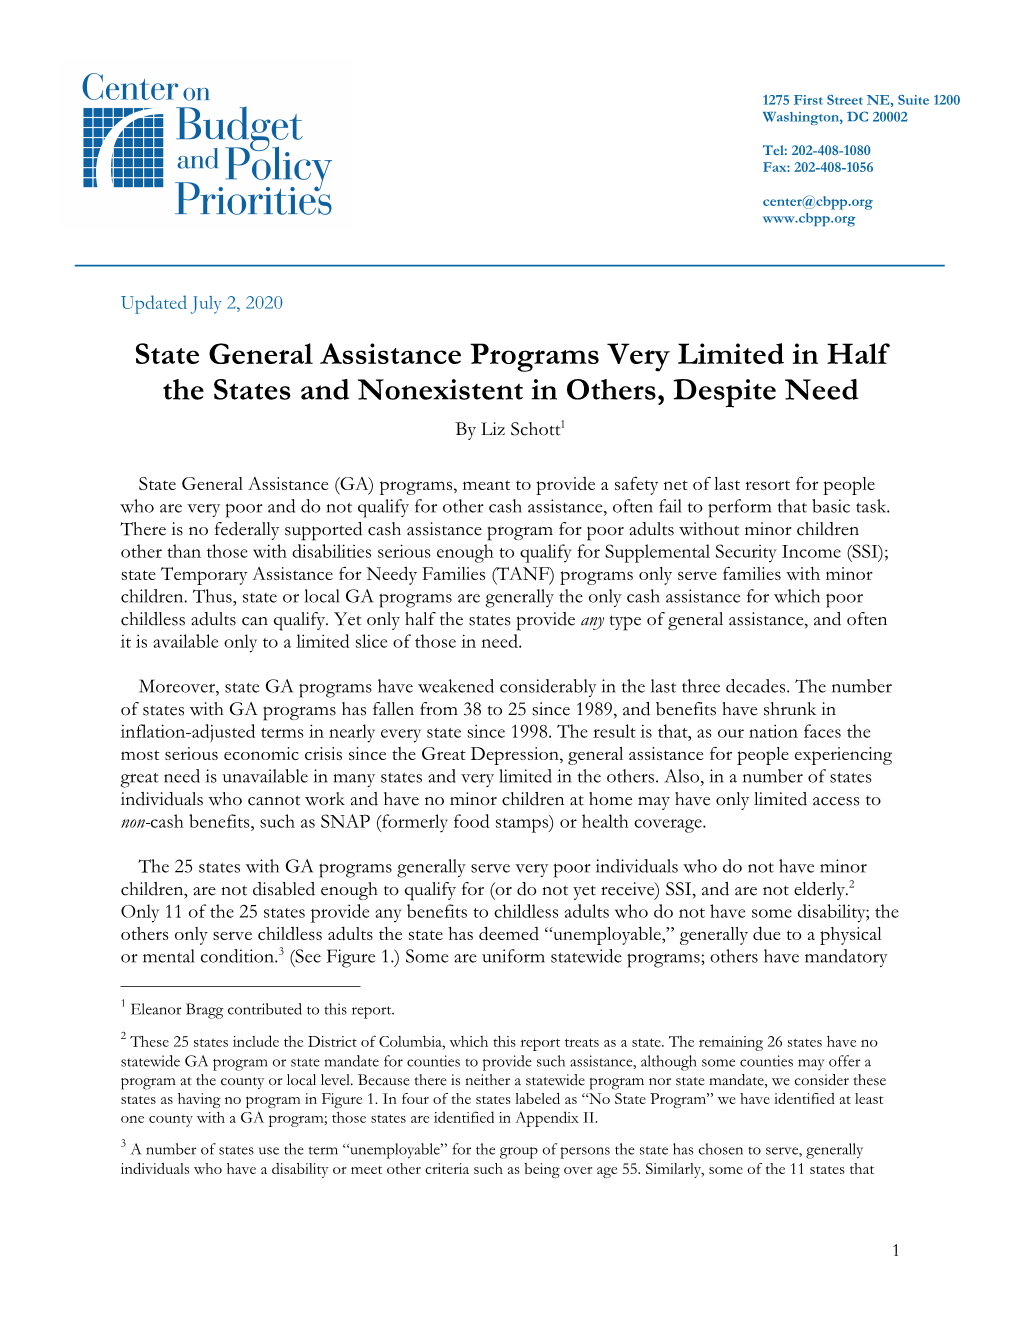 State General Assistance Programs Very Limited in Half the States and Nonexistent in Others, Despite Need by Liz Schott1